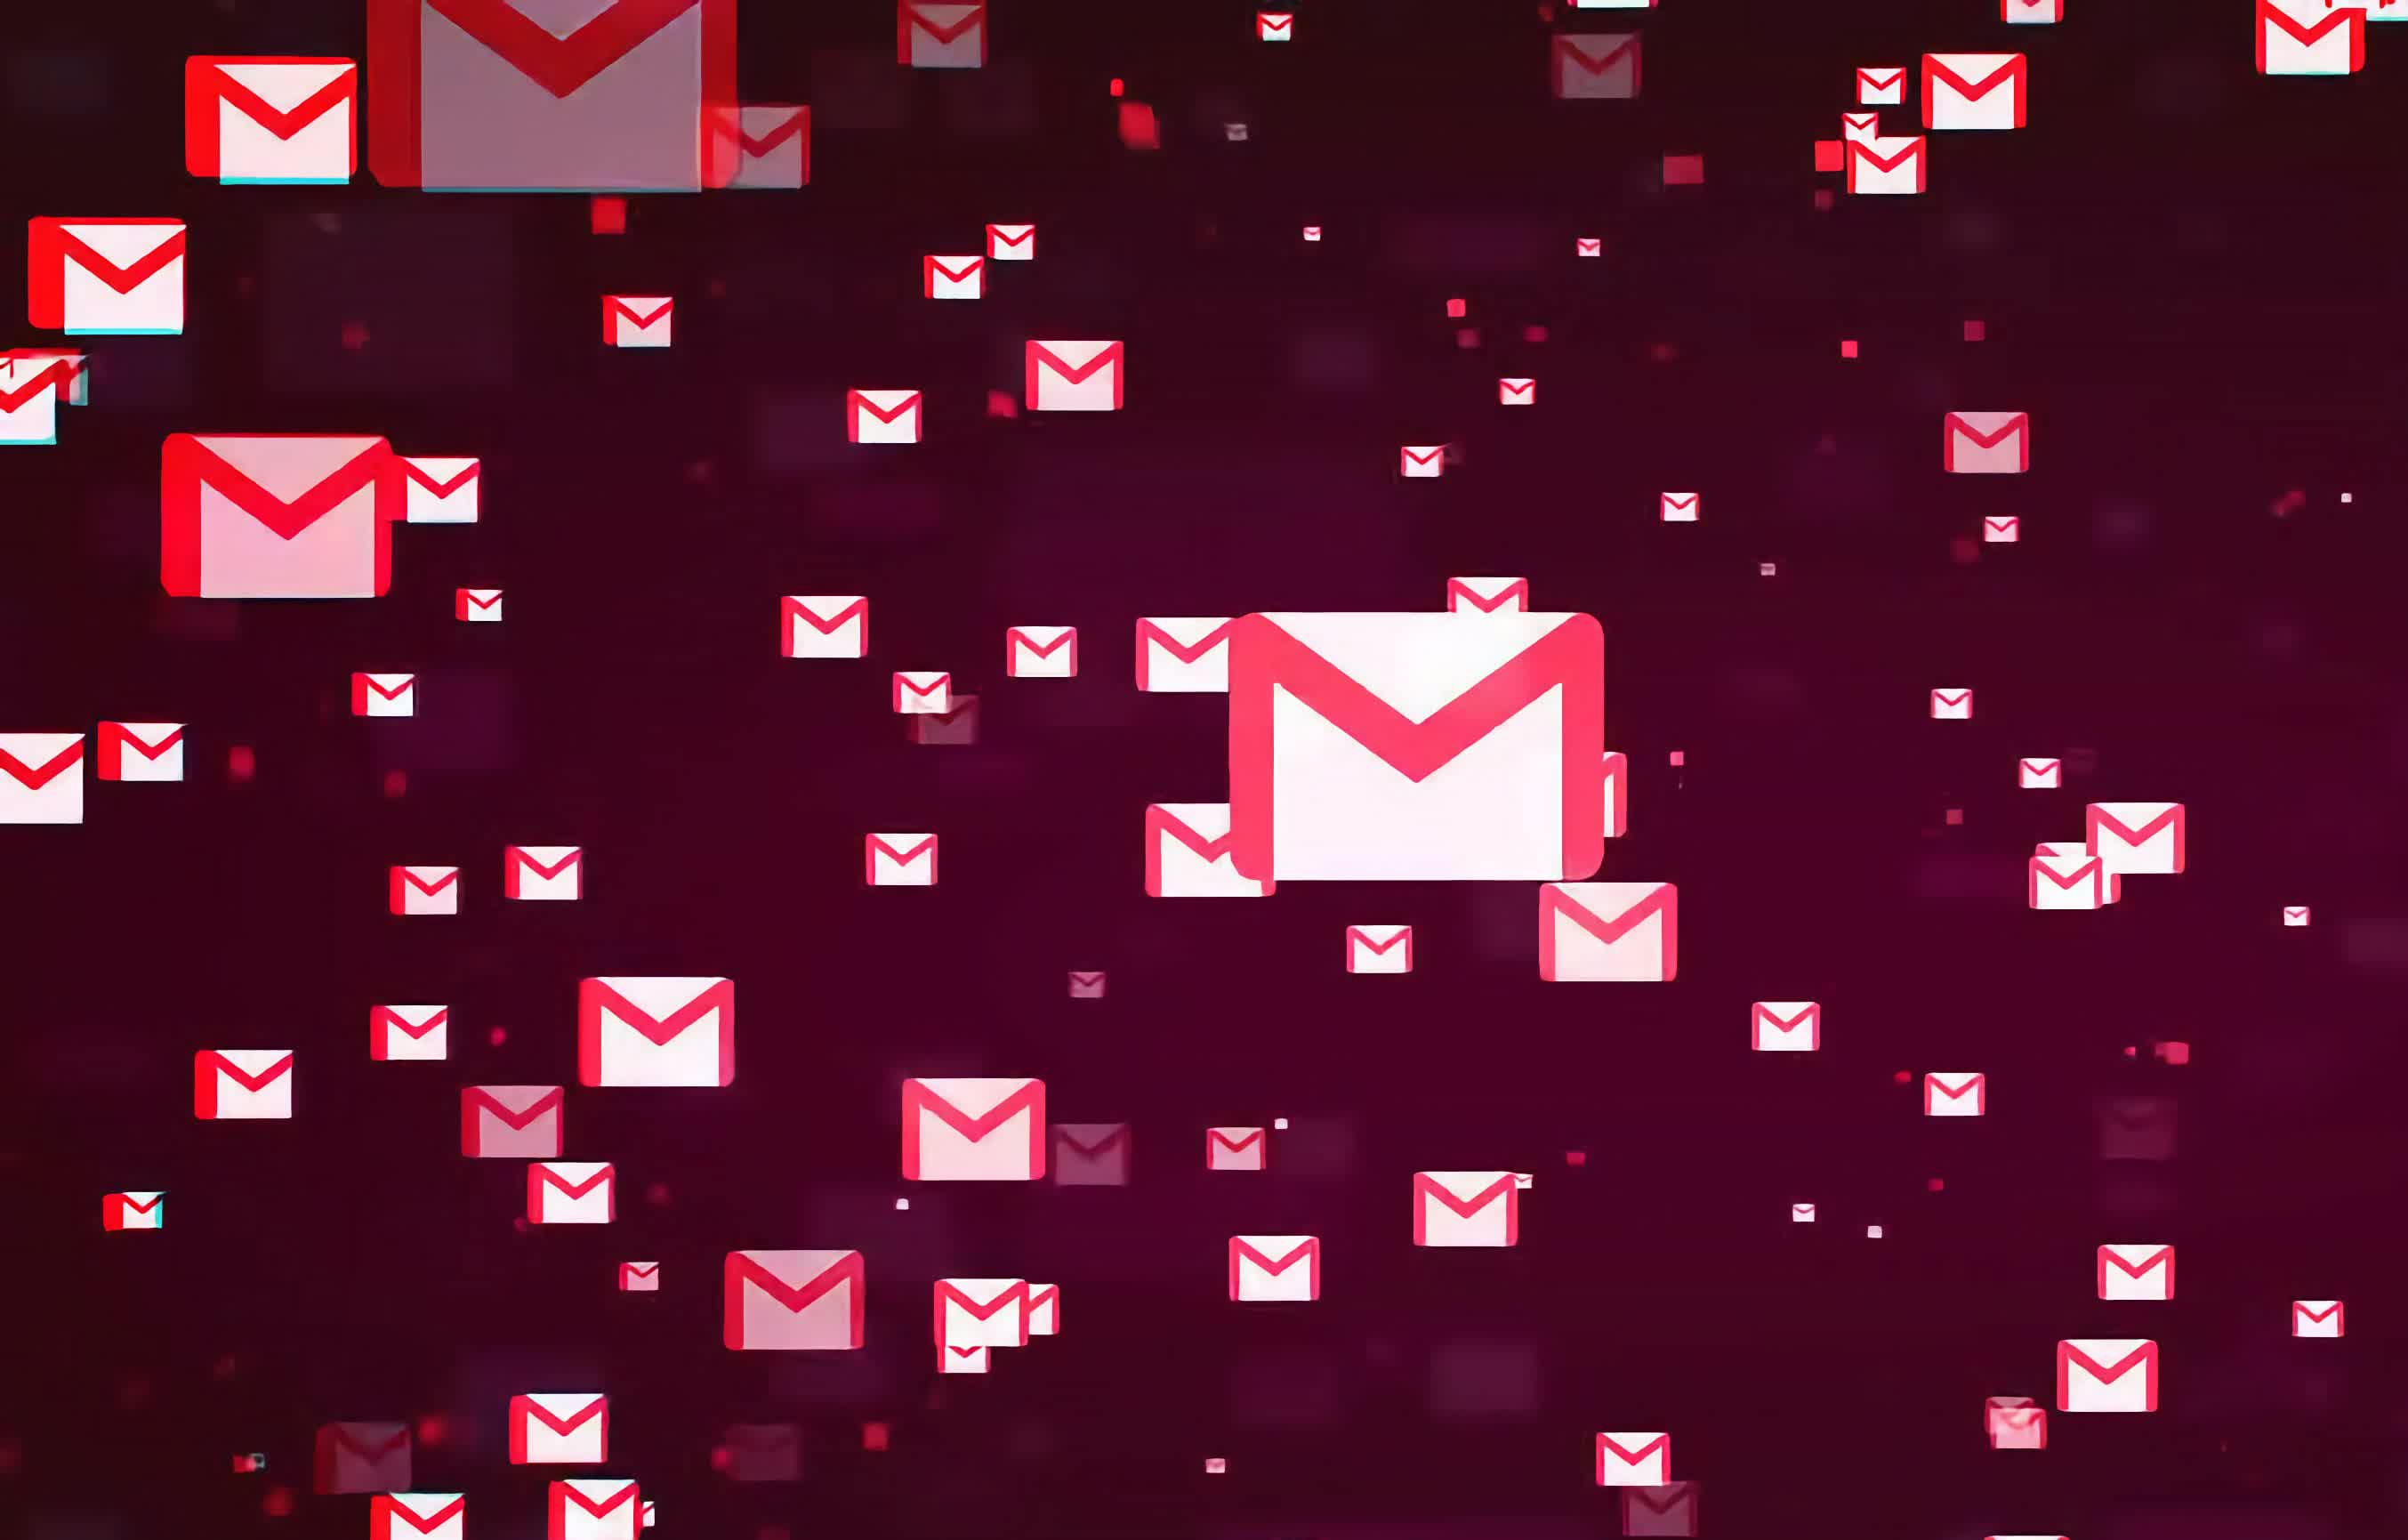 Gmail wants to win the war on junk mail, adds AI spam detection